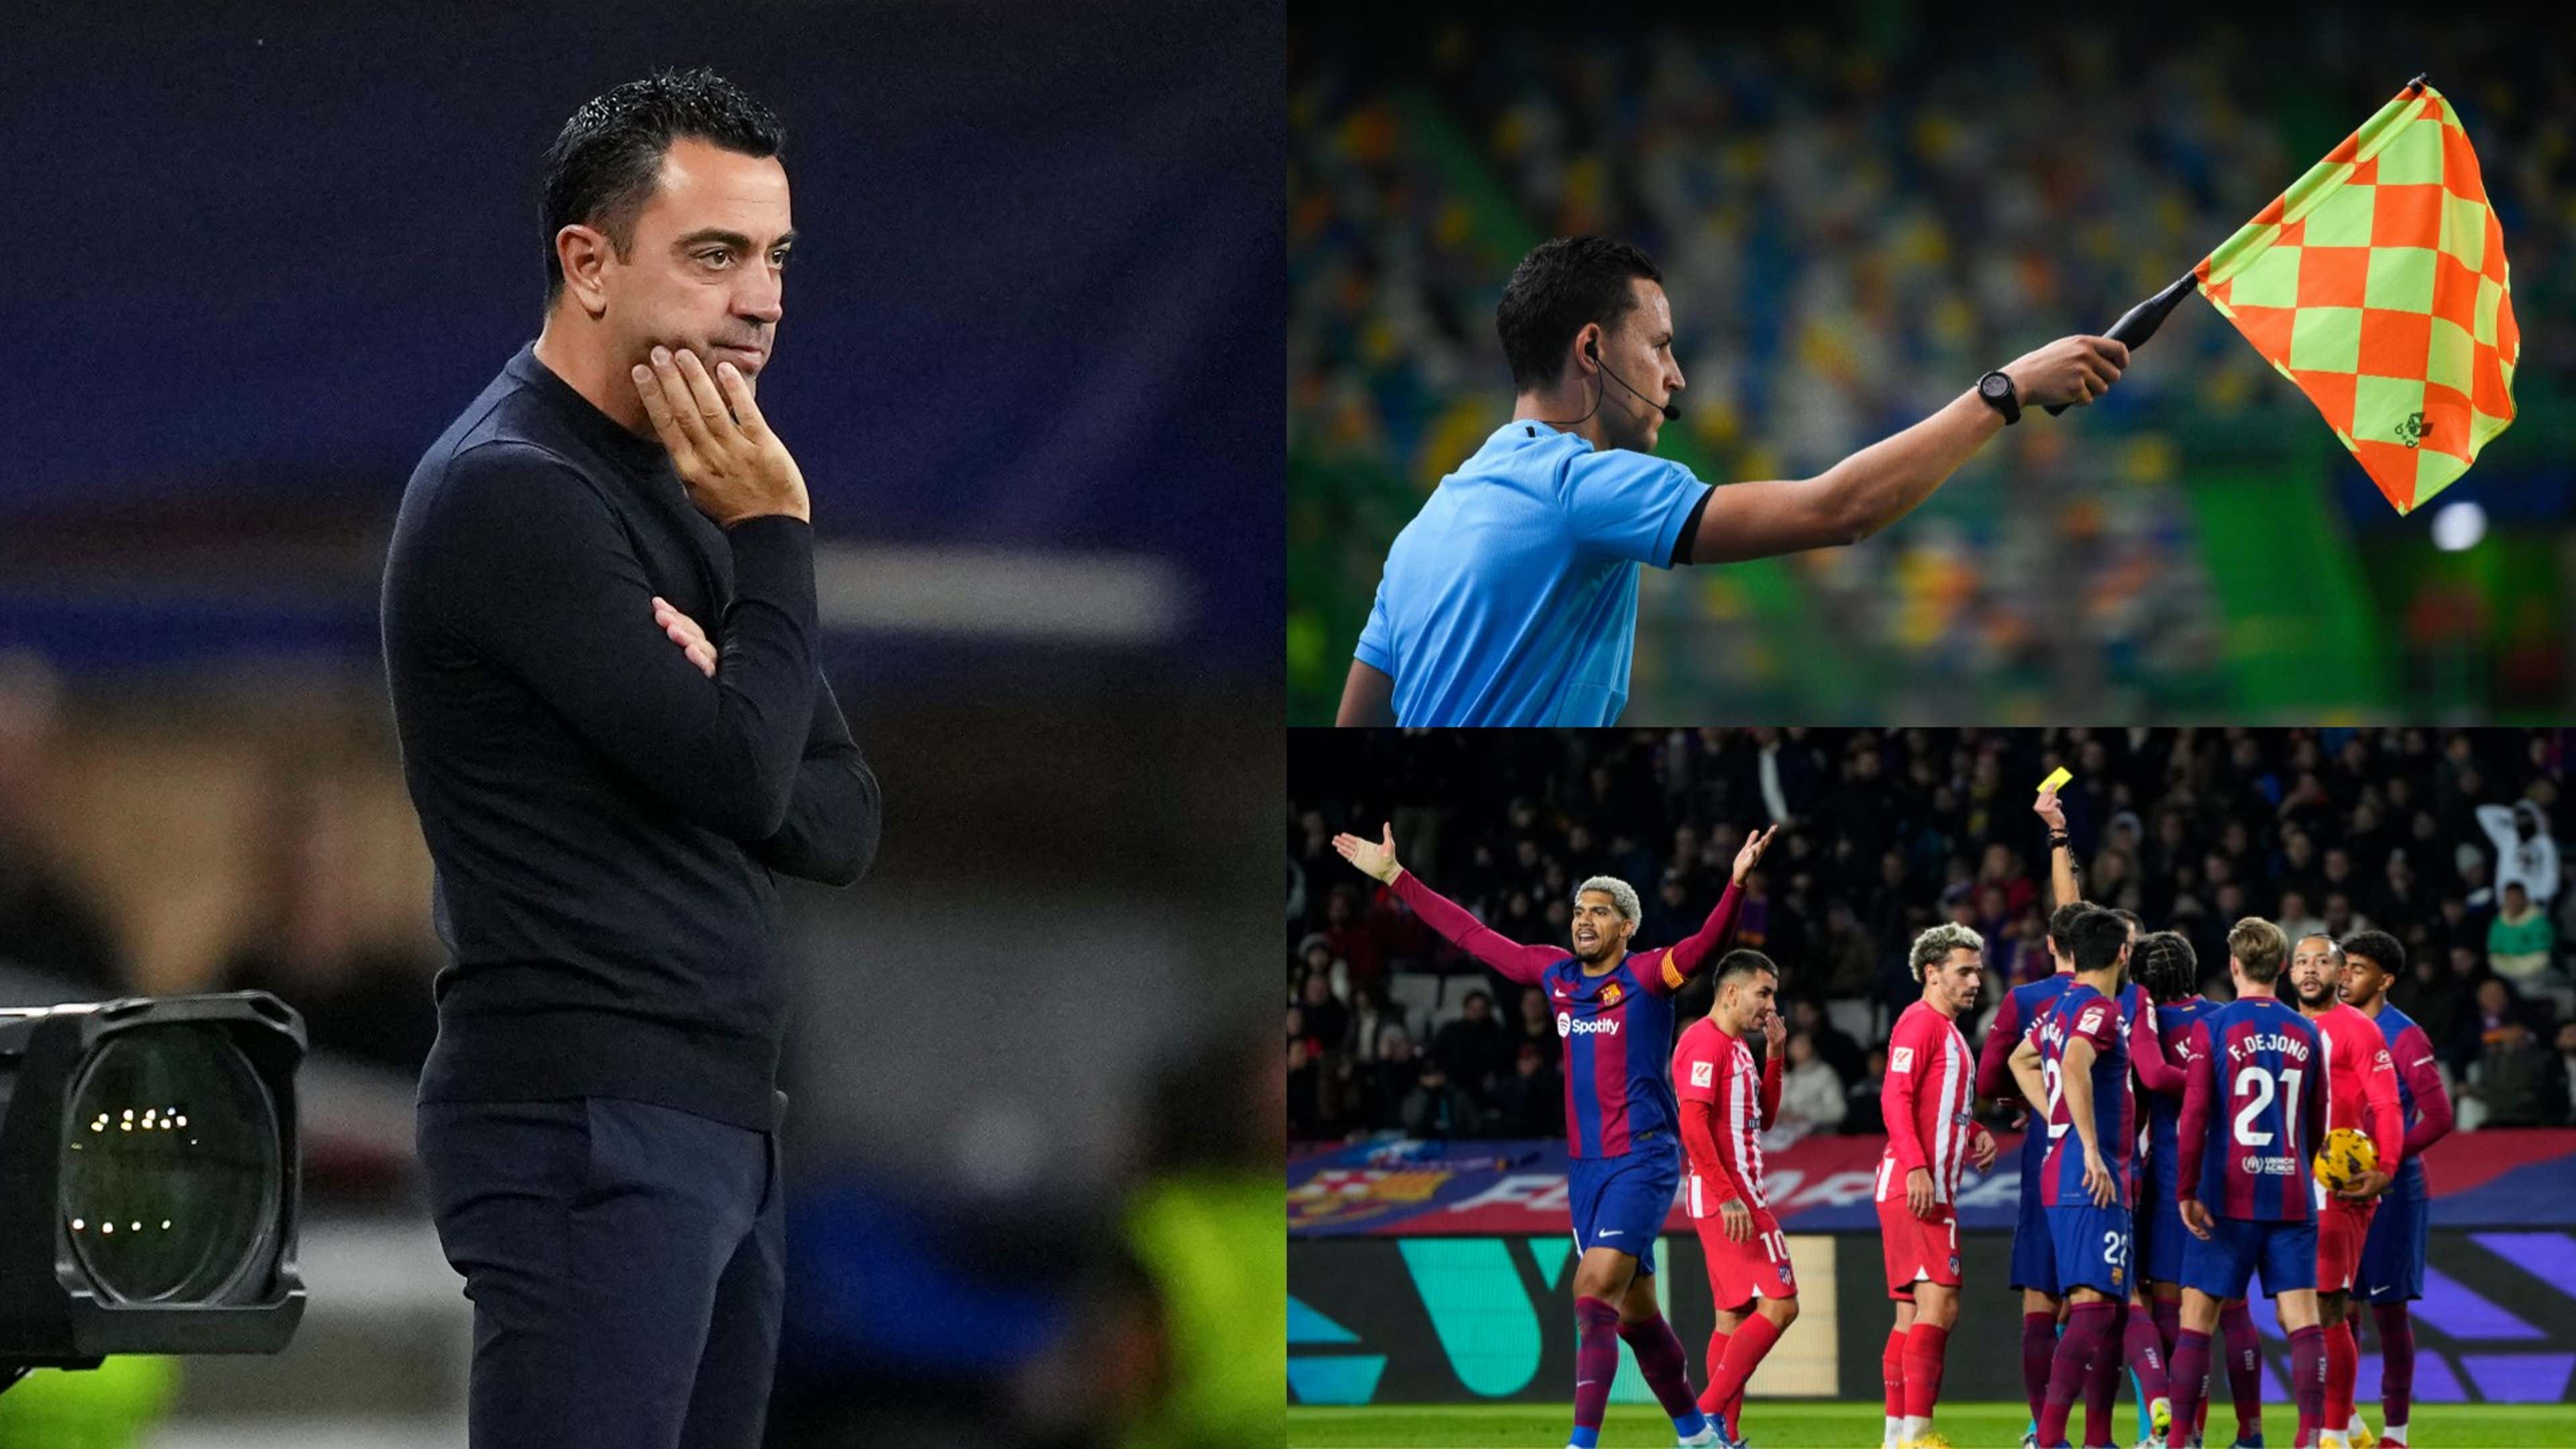 \'spying\' Blaugrana players room official enter Barcelona of dressing trying clash on caught to accuse referee Atletico assistant Madrid after as